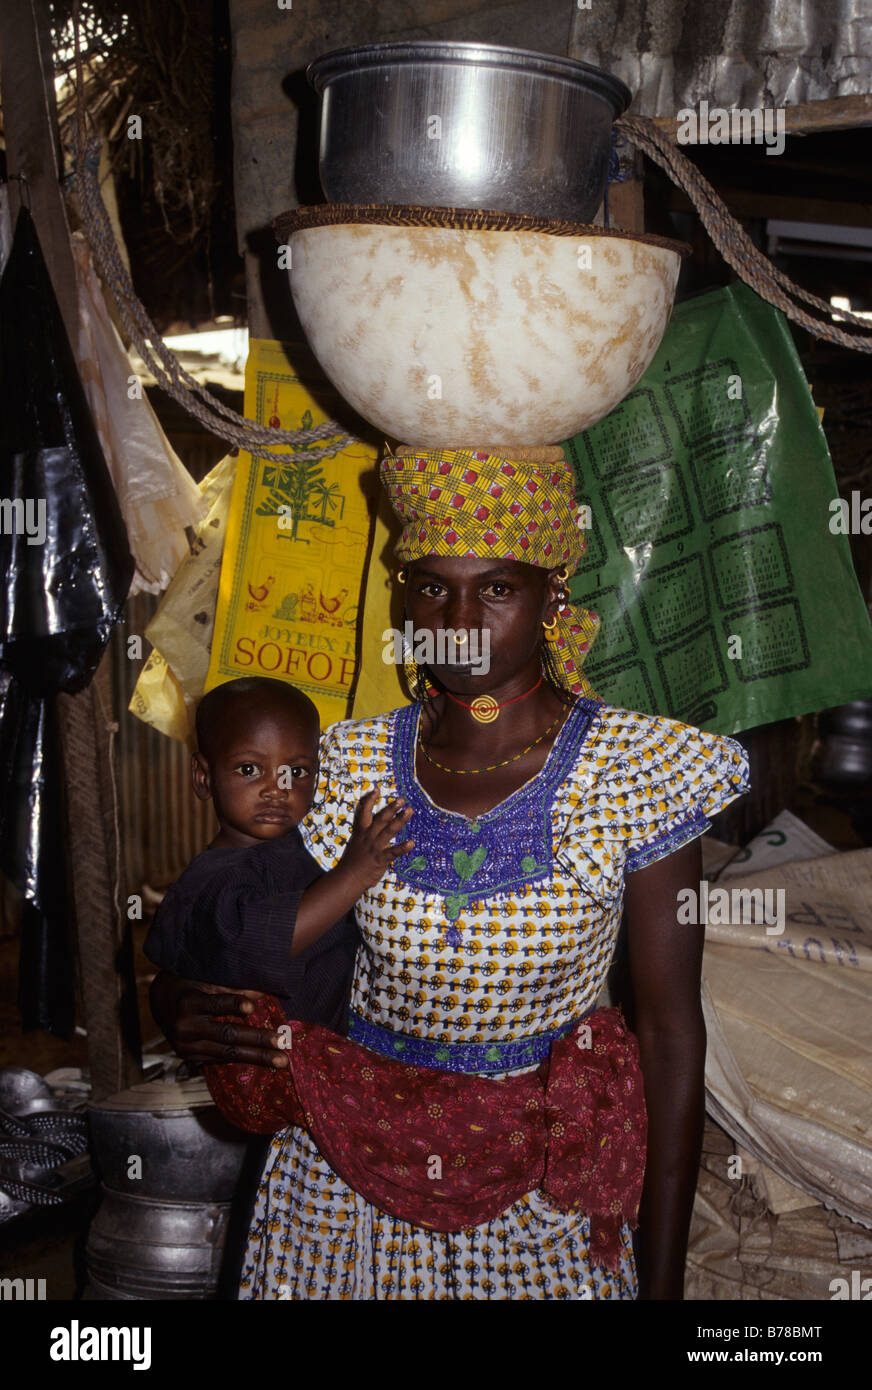 Tortiya, Cote d'Ivoire, Ivory Coast. A Fulani Mother and Child Balancing Calabash and Cooking Pot on her Head. Stock Photo